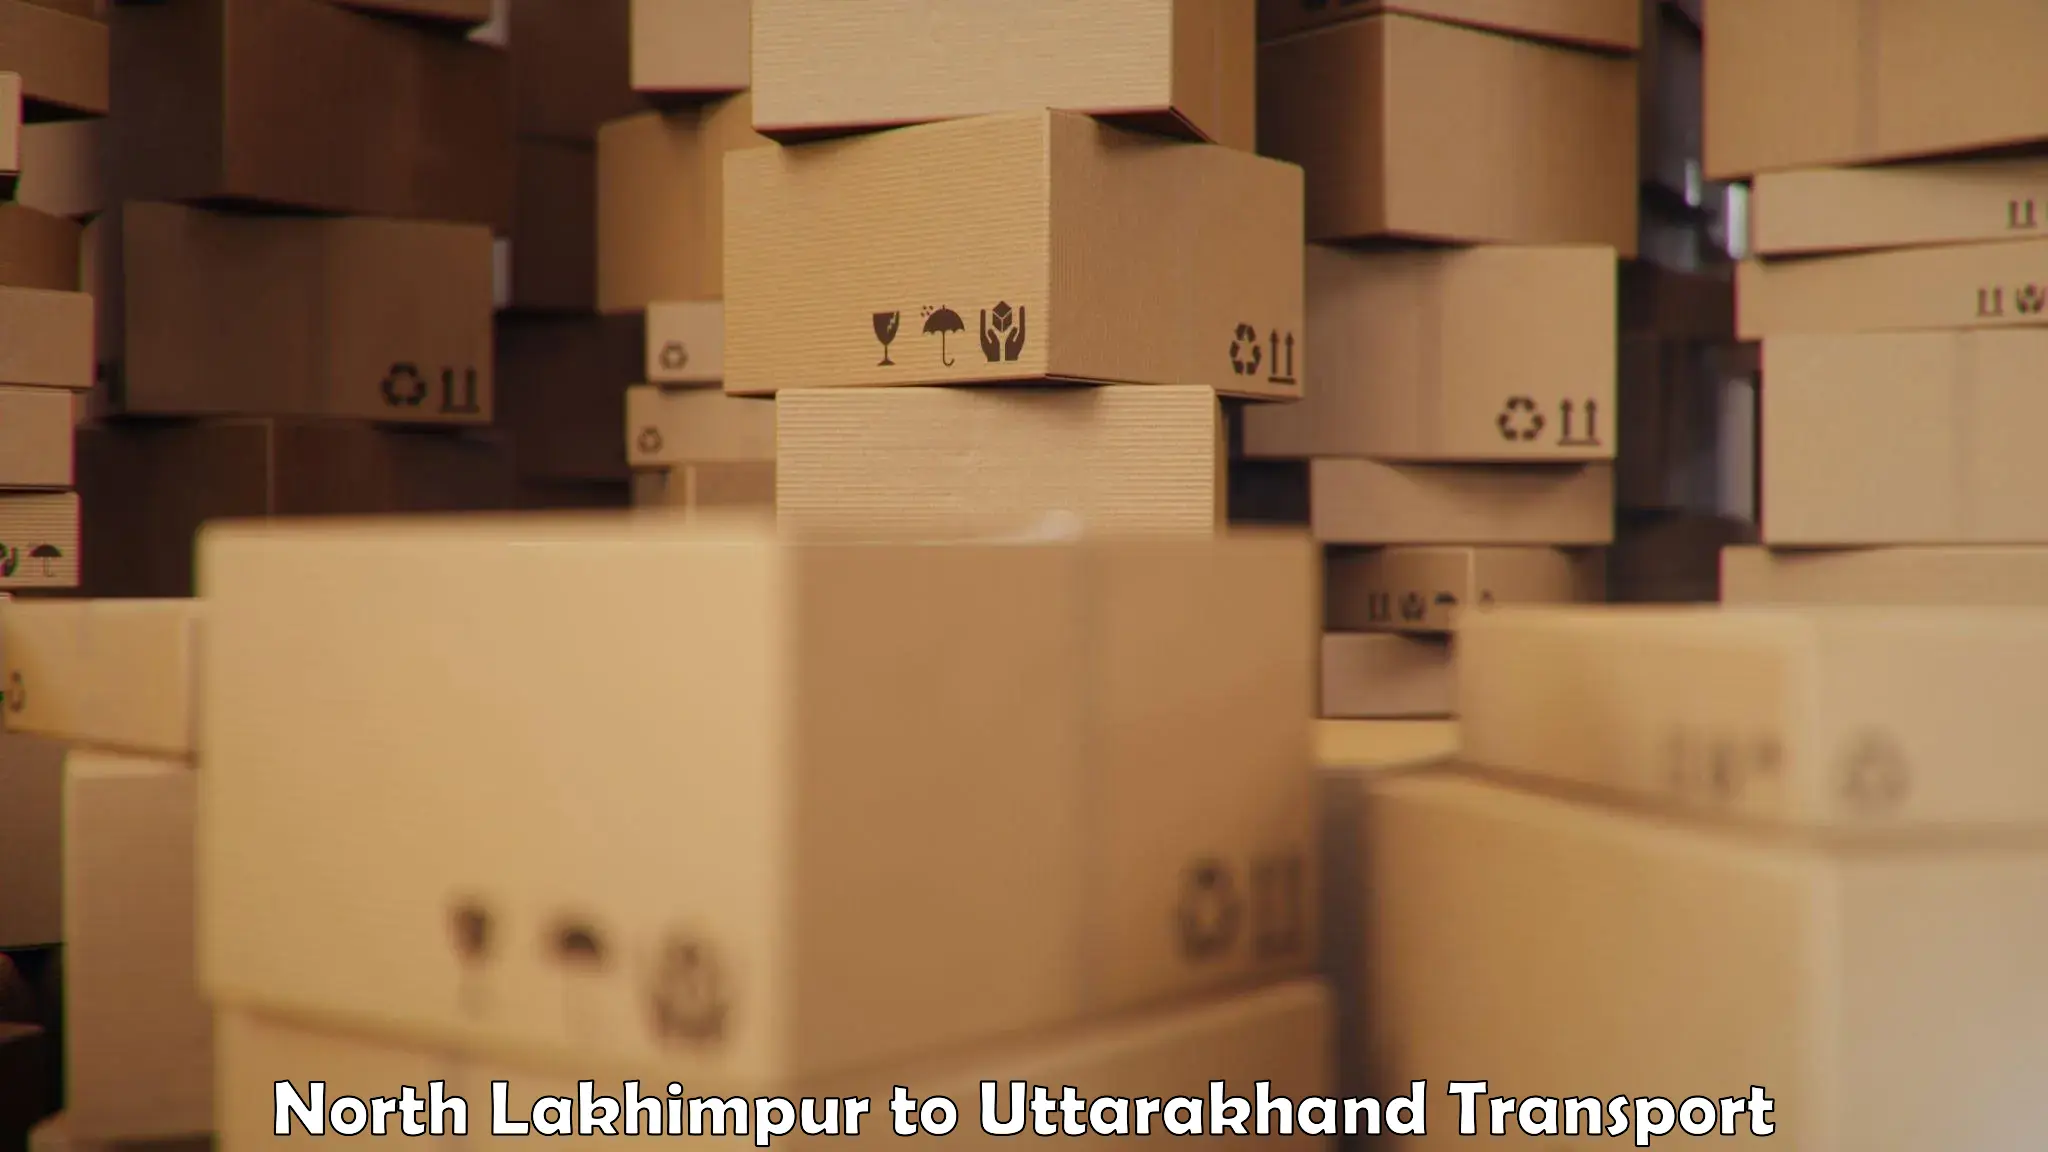 Container transportation services in North Lakhimpur to Tehri Garhwal